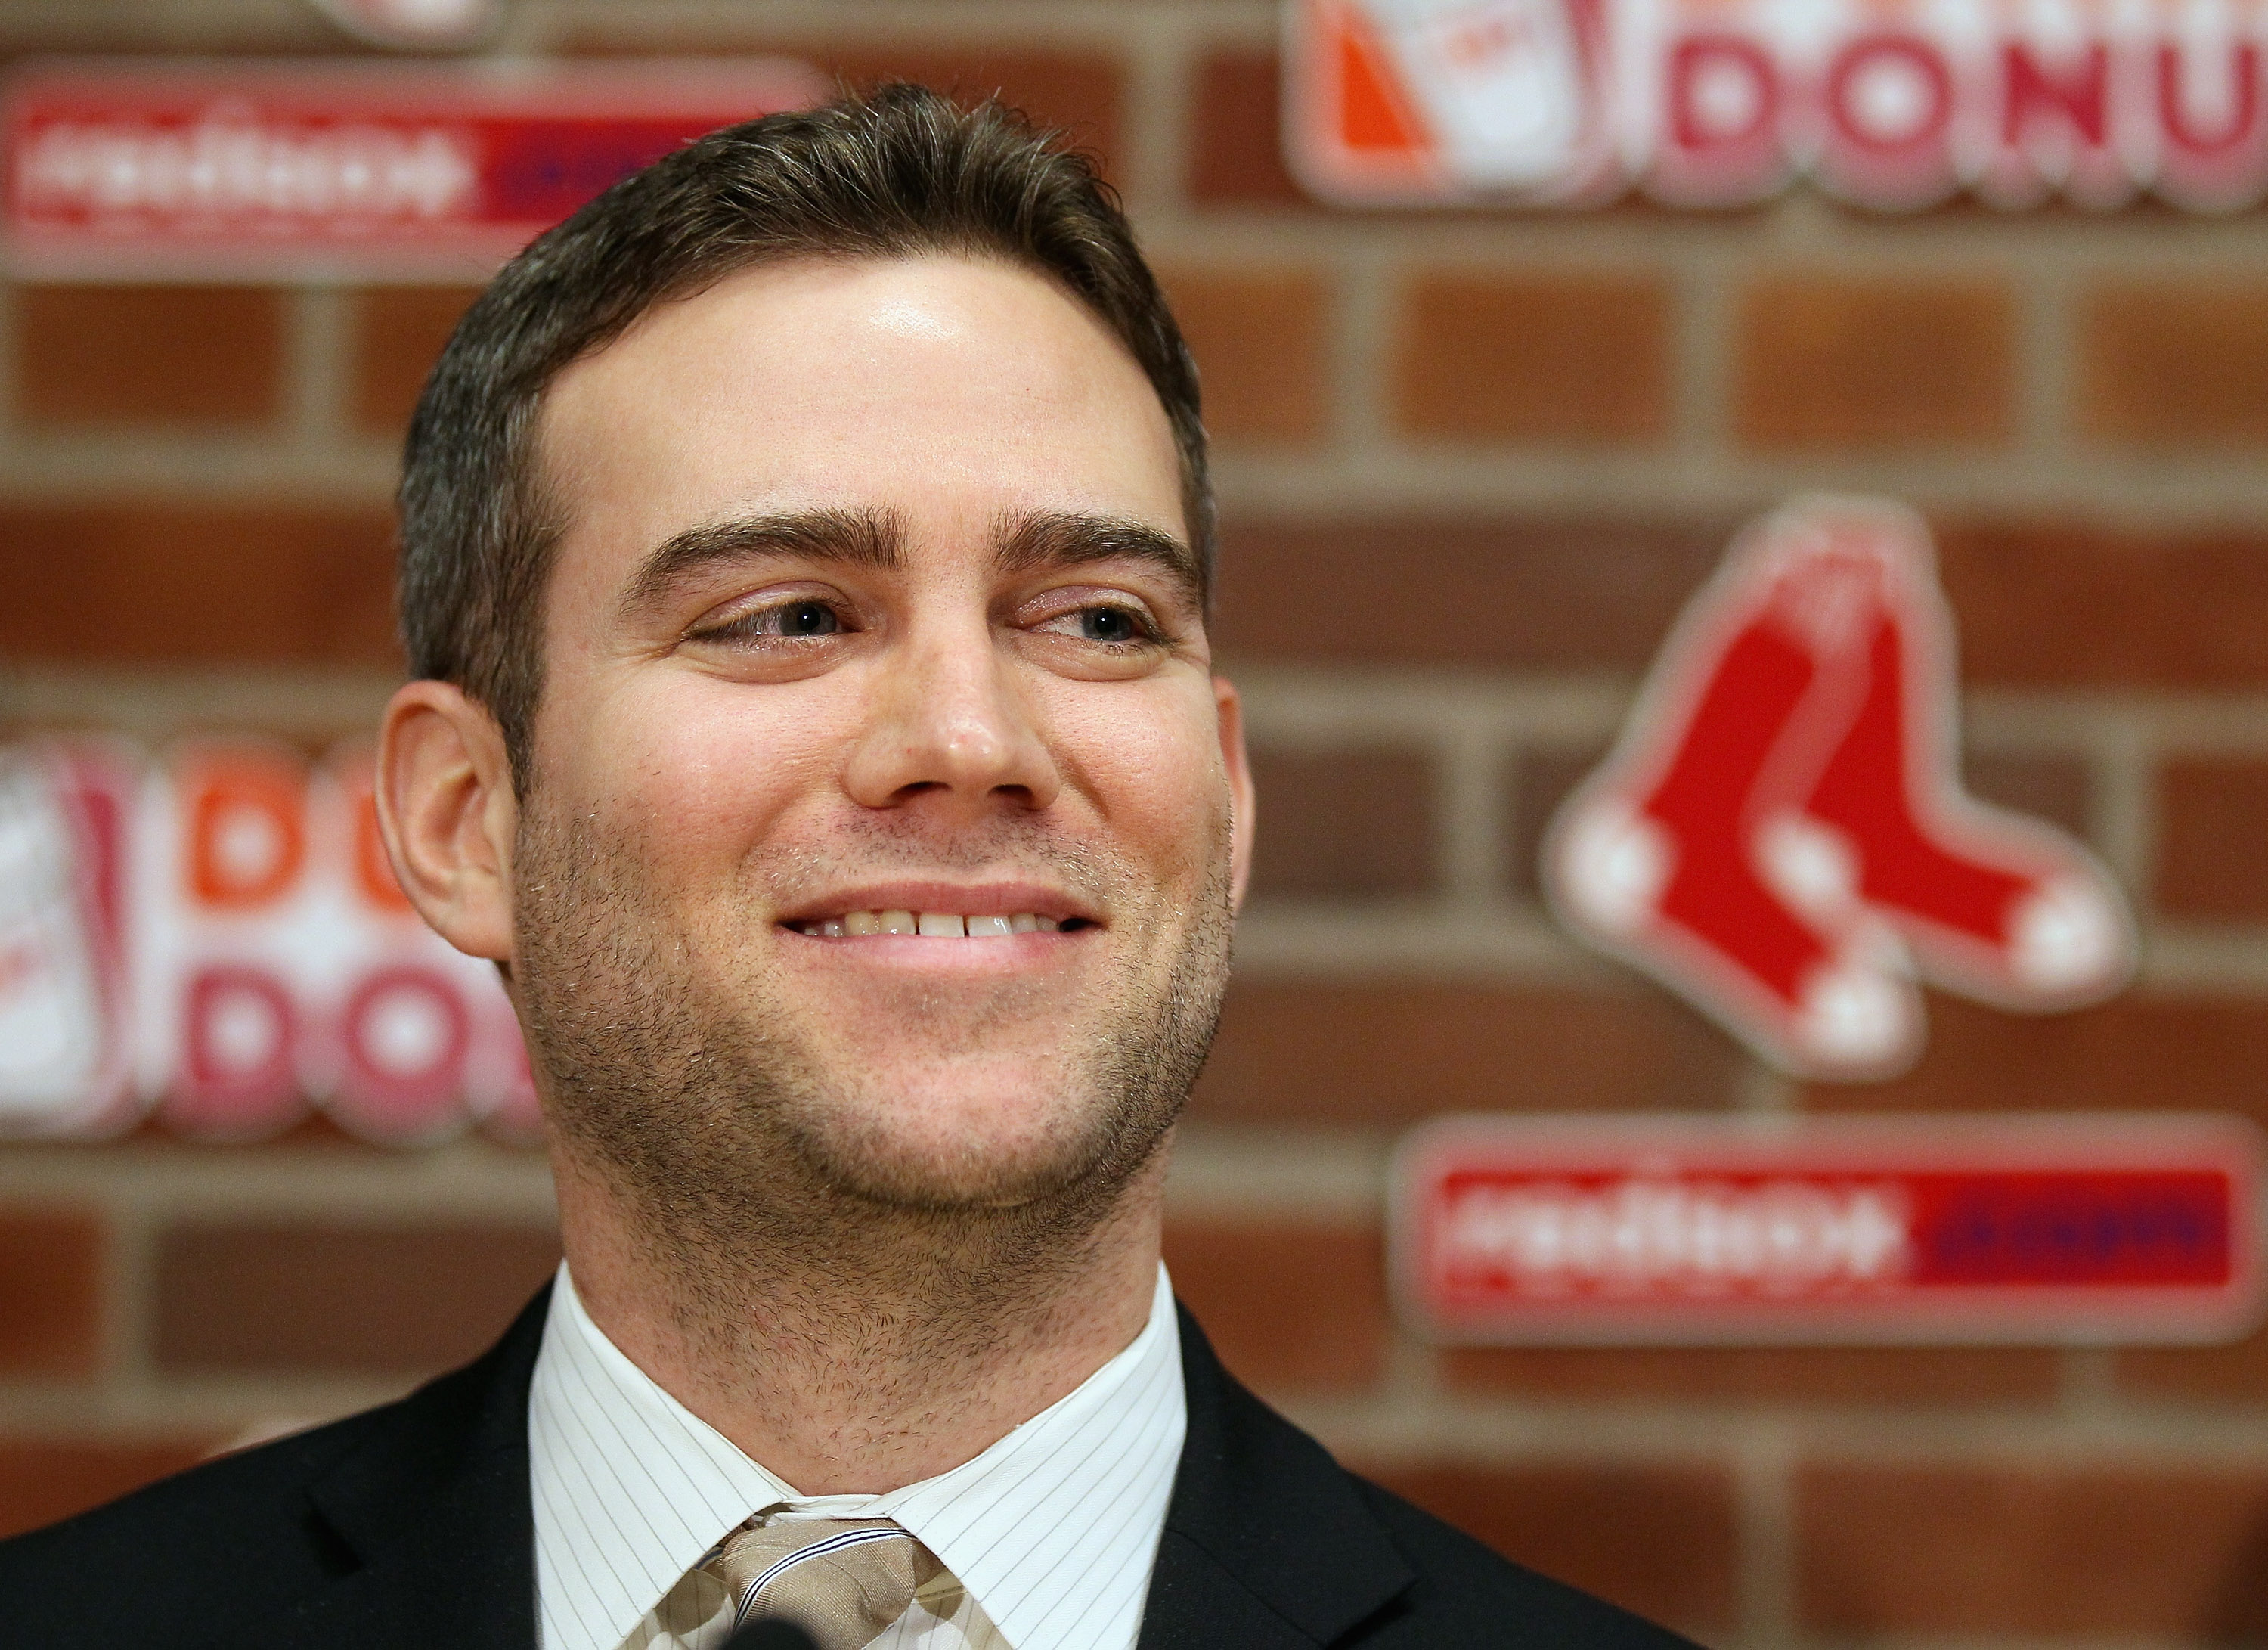 BOSTON, MA - DECEMBER 11:  Theo Epstein, general manager of the Boston Red Sox, answers questions about Carl Crawford during a press conference on December 11,  2010 at the Fenway Park in Boston, Massachusetts.  (Photo by Elsa/Getty Images)